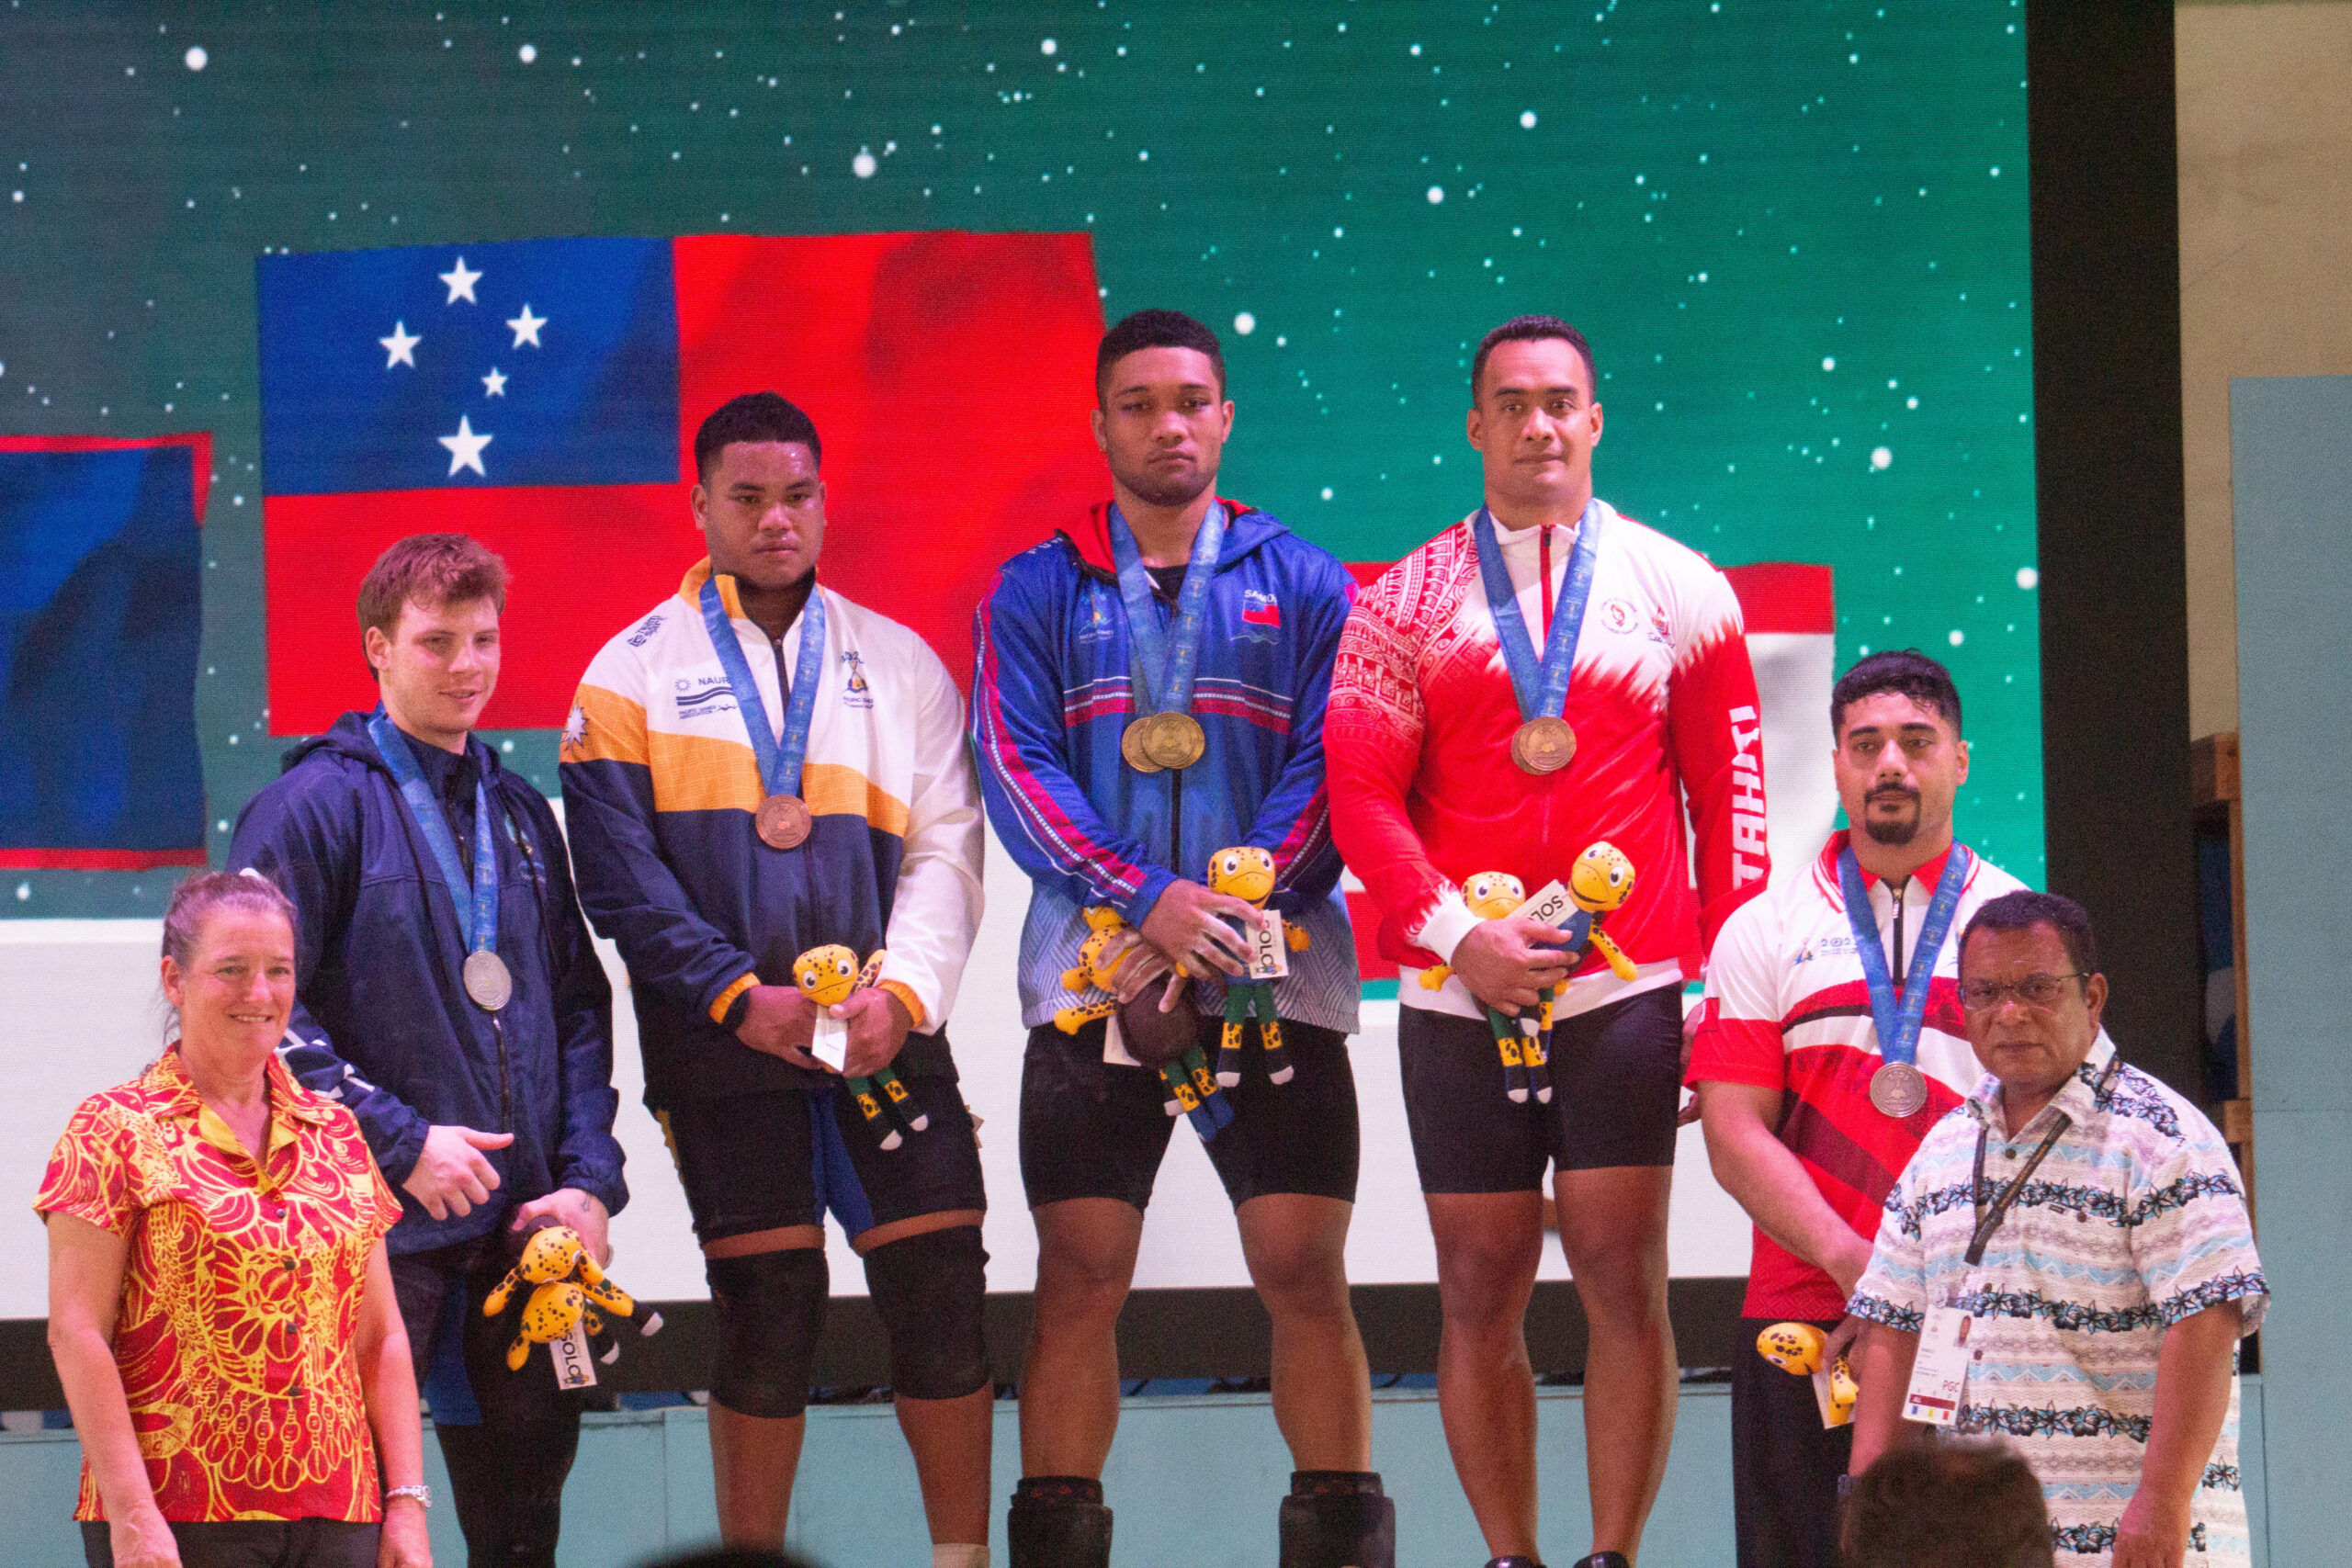 Male weightlifters at a medal ceremony